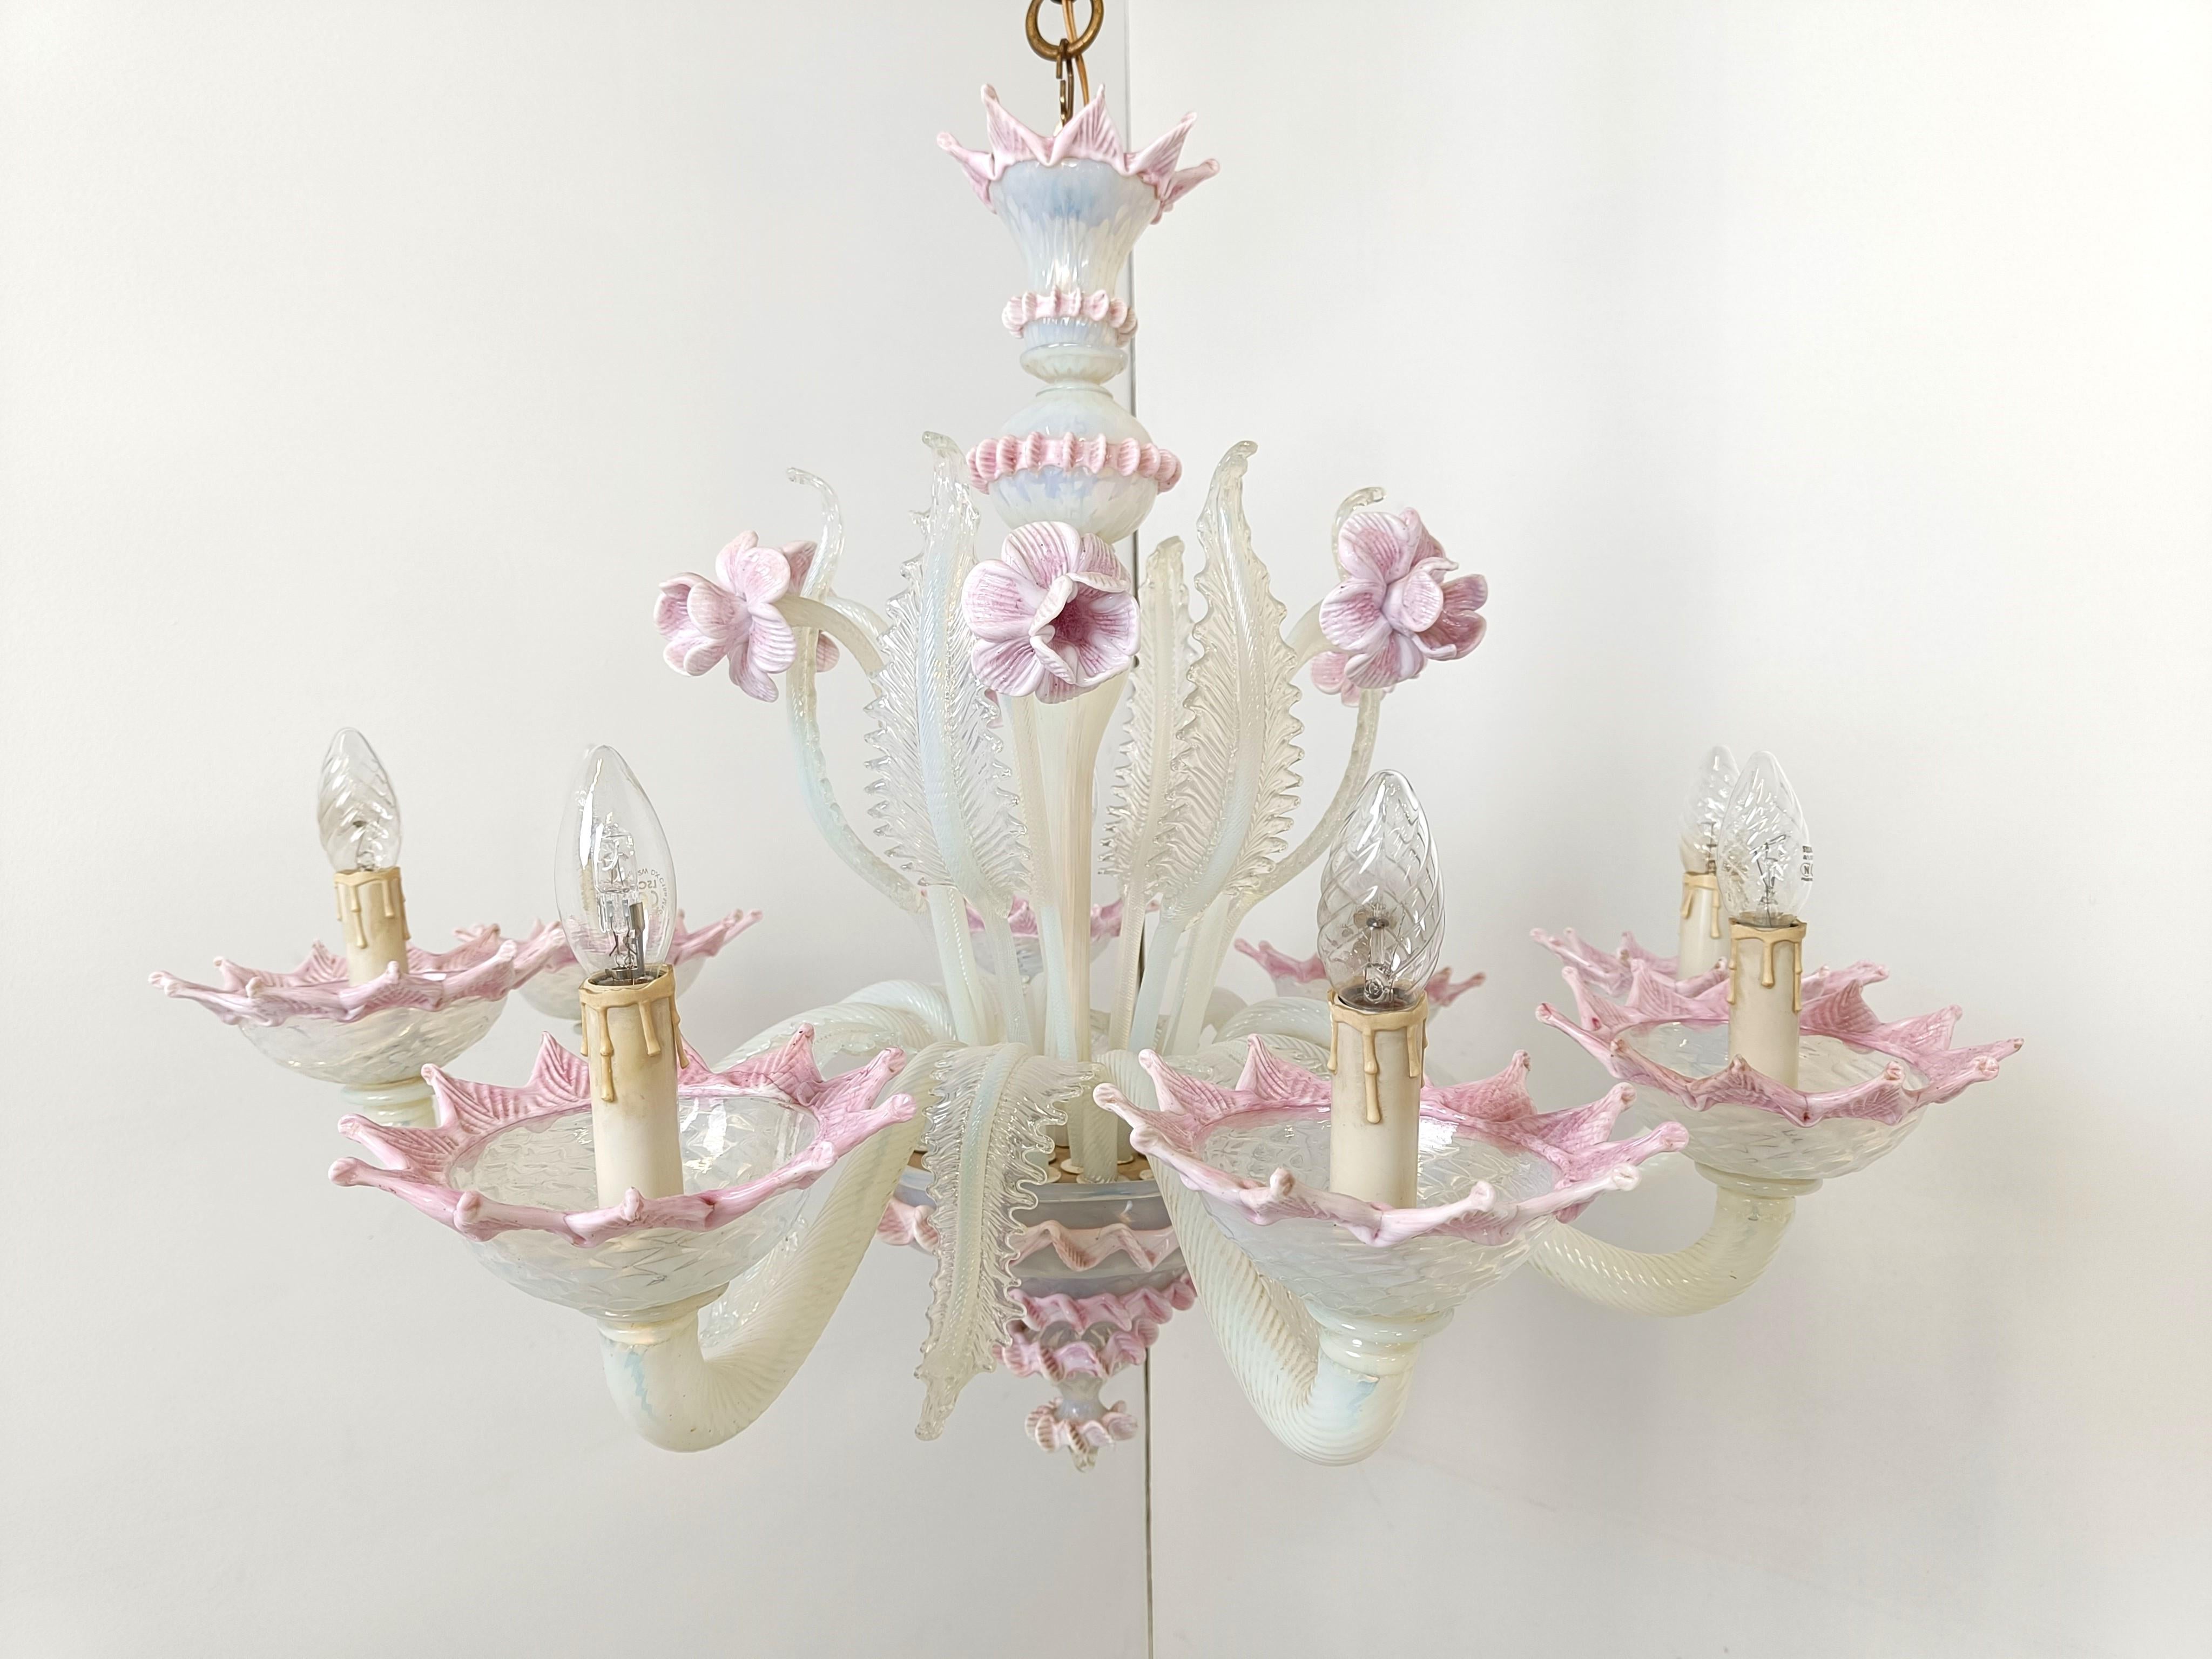 Vintage floral murano glass chandelier, 1950s For Sale 2